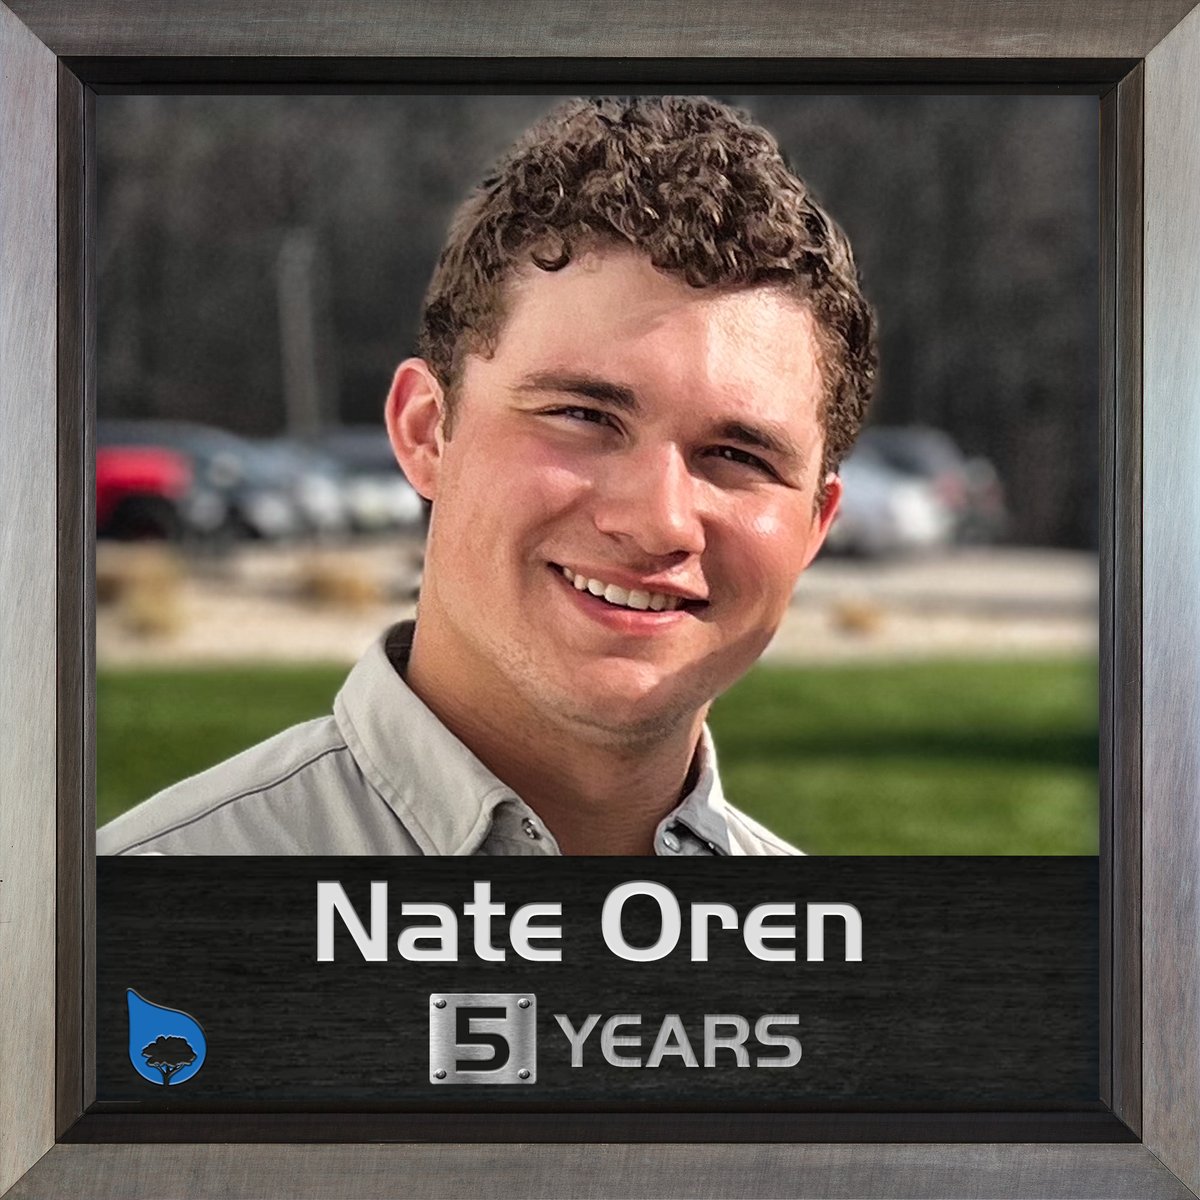 We have another five year anniversary to celebrate! Nate is our Crew 1 leader, and he's another reason for our success. We're so thankful he put his modeling career on hold to stay with us. 😁

#fiveyears #leader #treecare